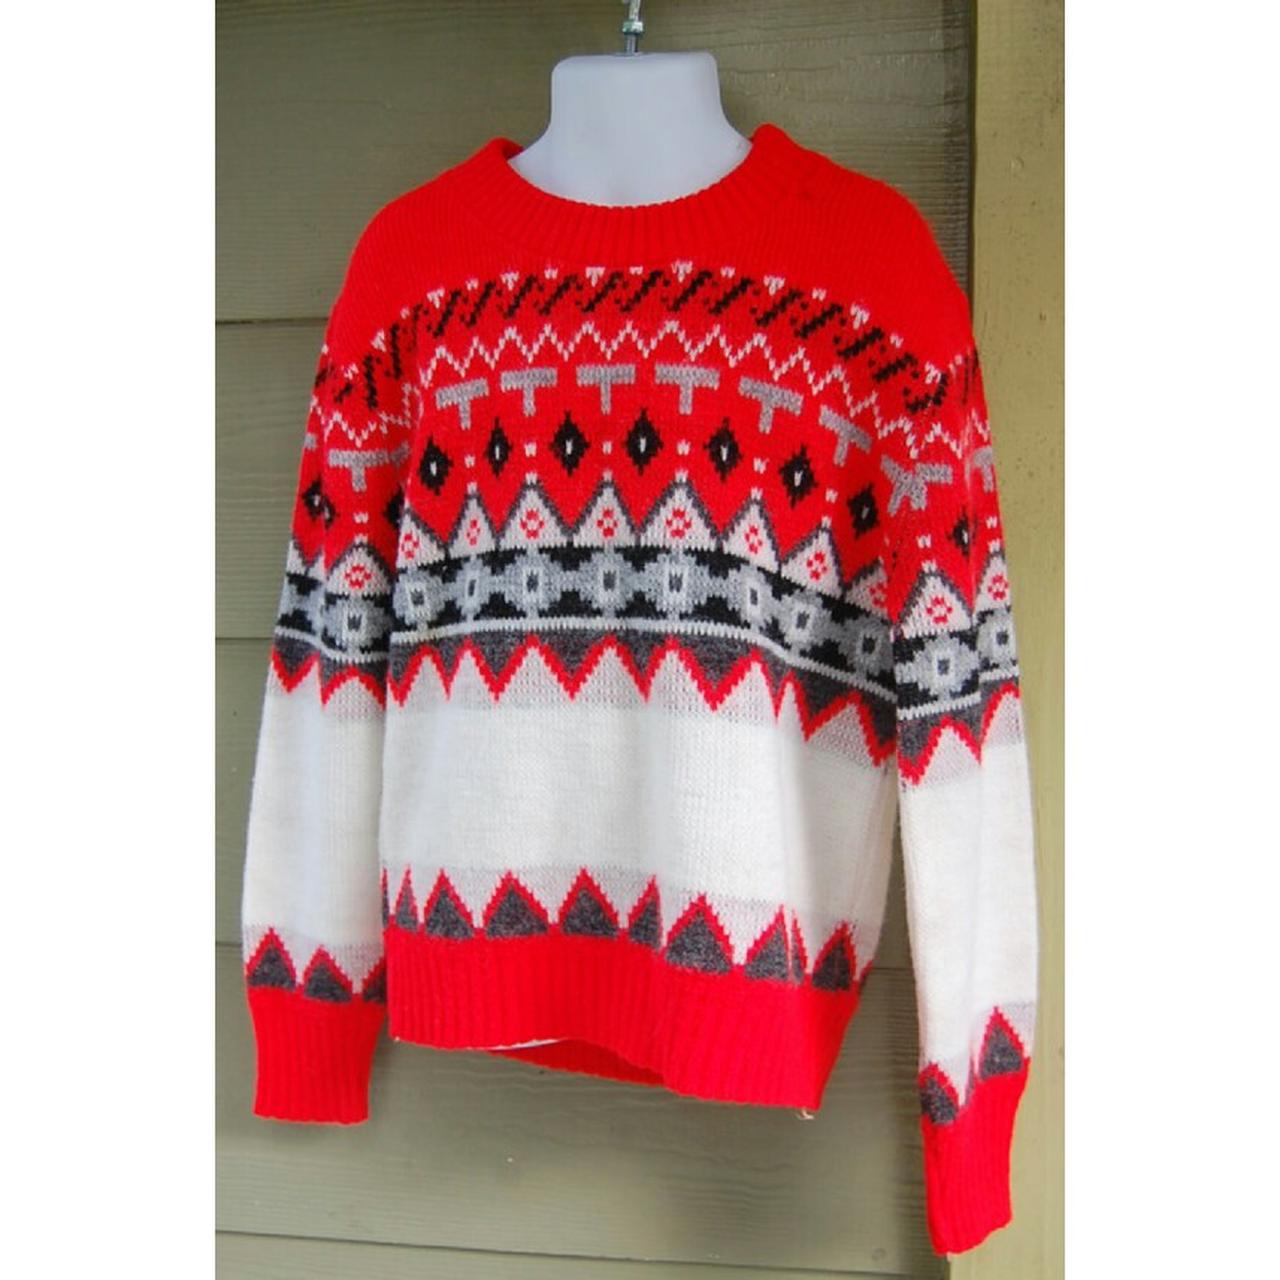 Women's Red and White Jumper | Depop